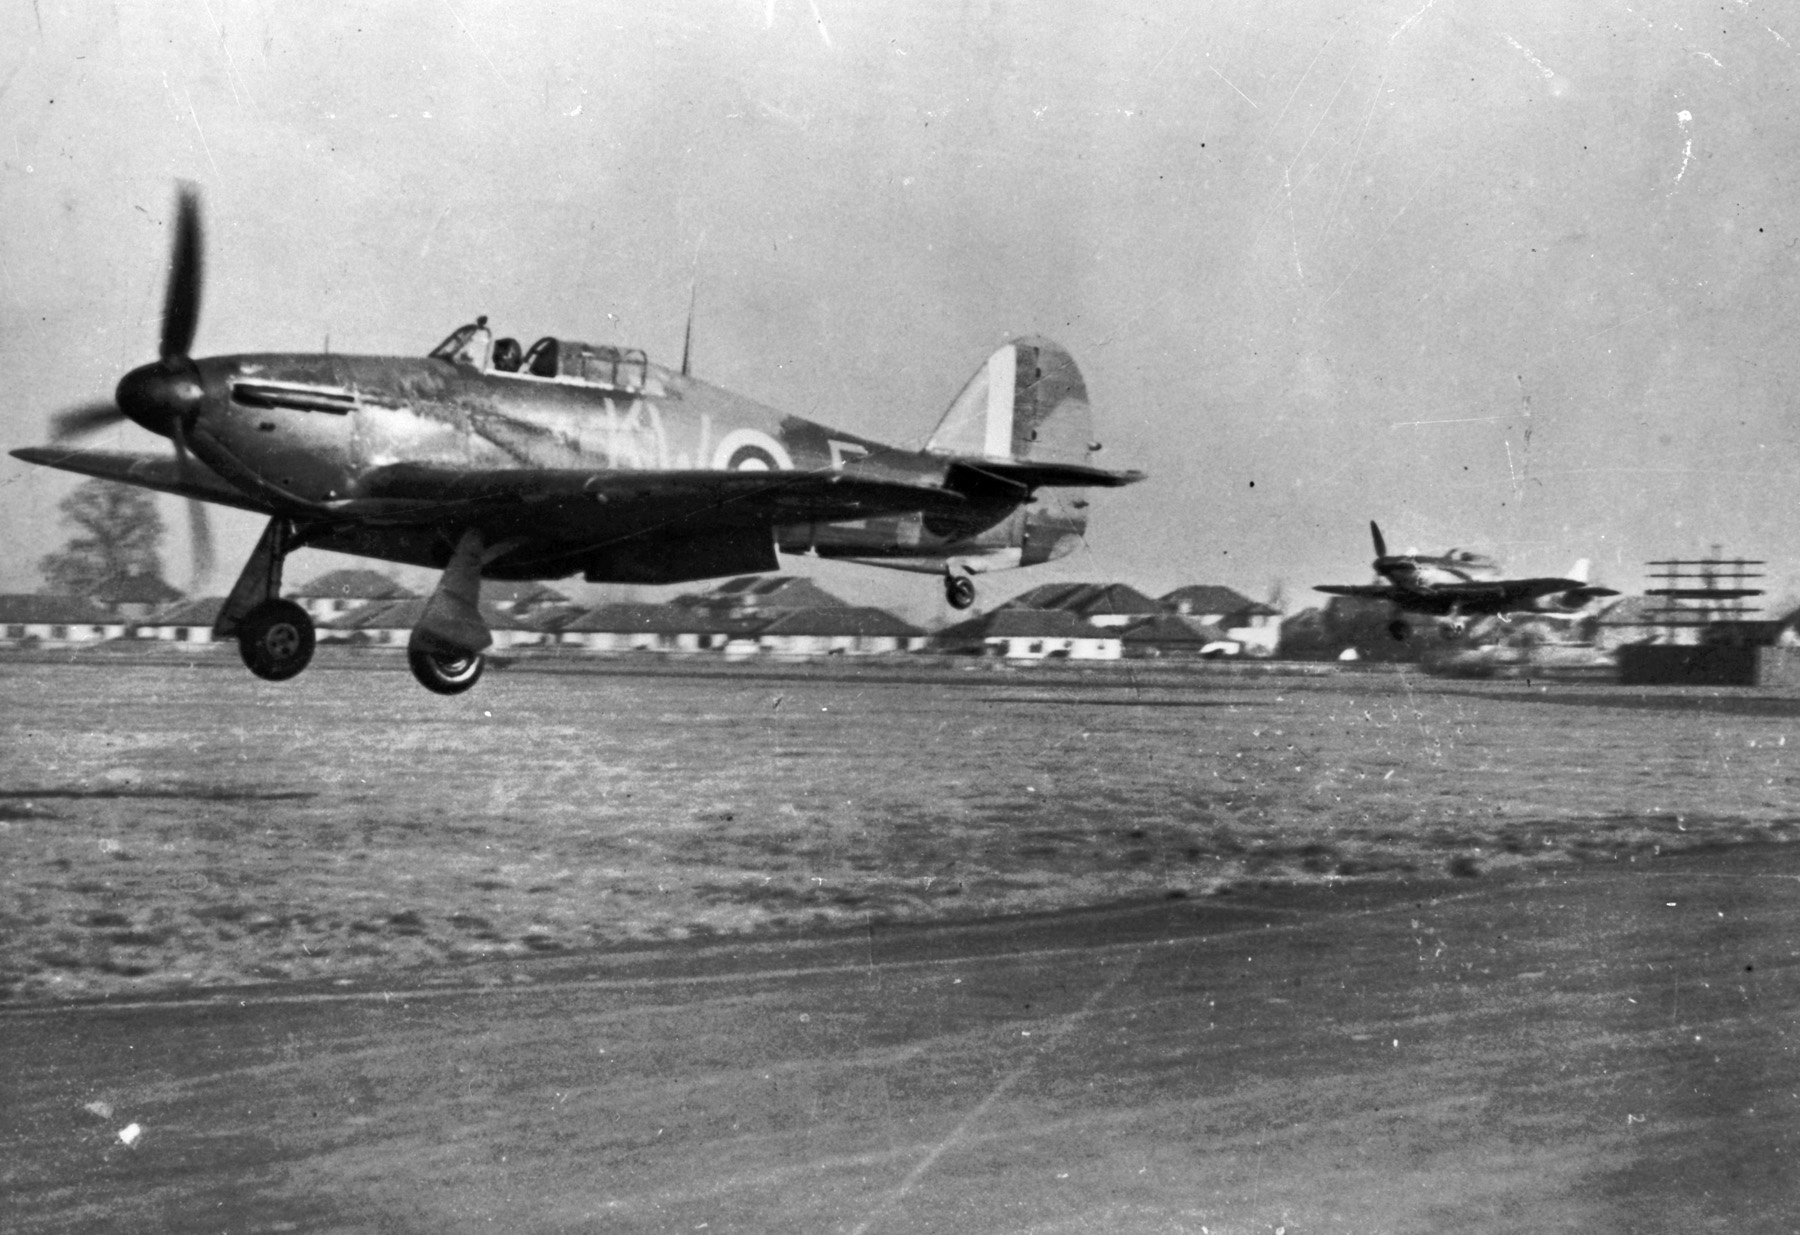 Hawker Hurricanes take off on a mission. Although overshadowed by the faster Spitfire, the more maneuverable Hurricane accounted for 60 percent of German losses during the Battle of Britain.